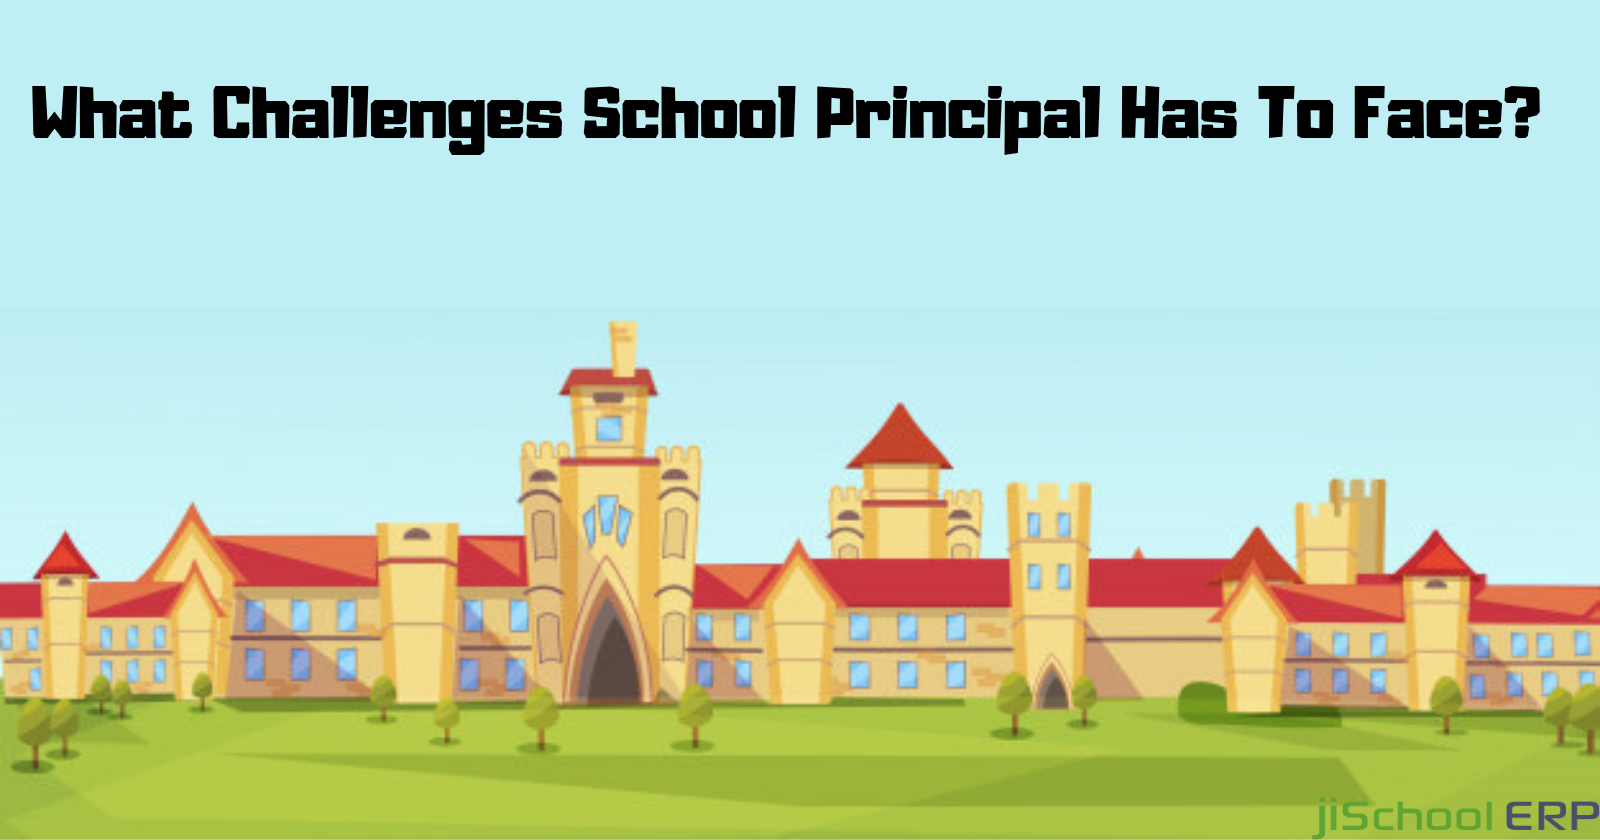 What Challenges School Principal Has To Face?